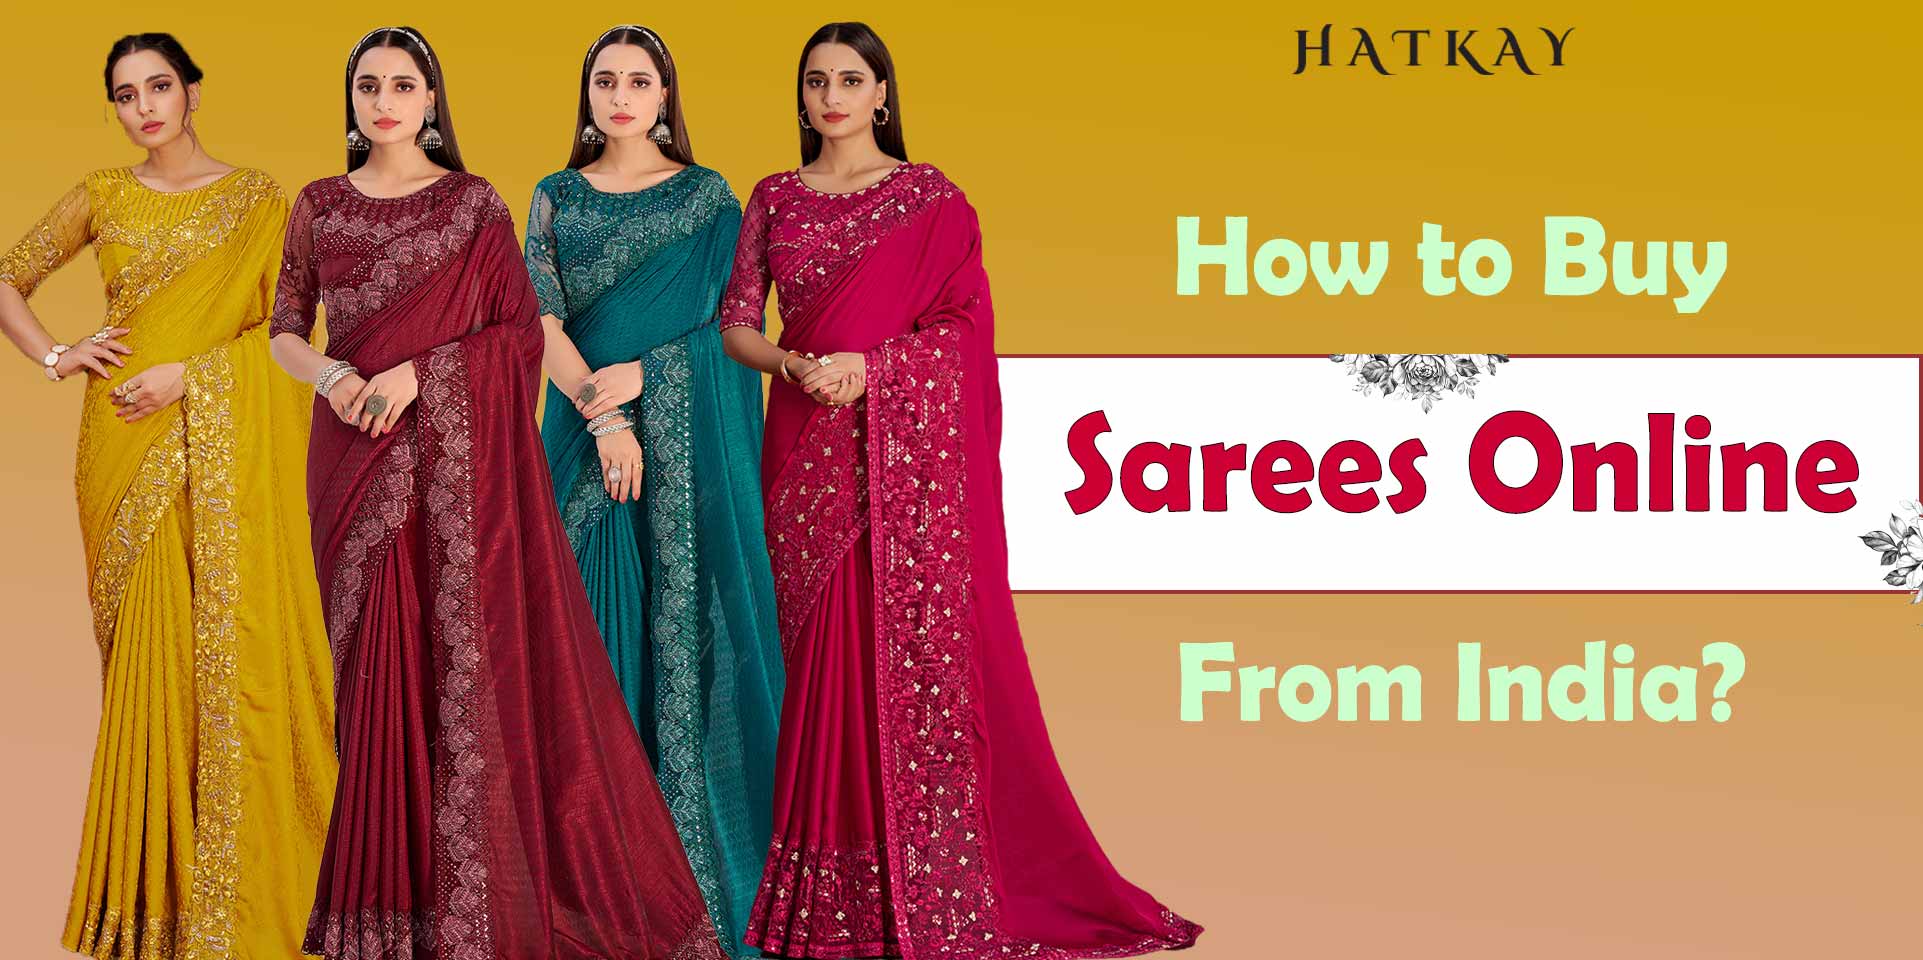 How to Buy Sarees Online from India?